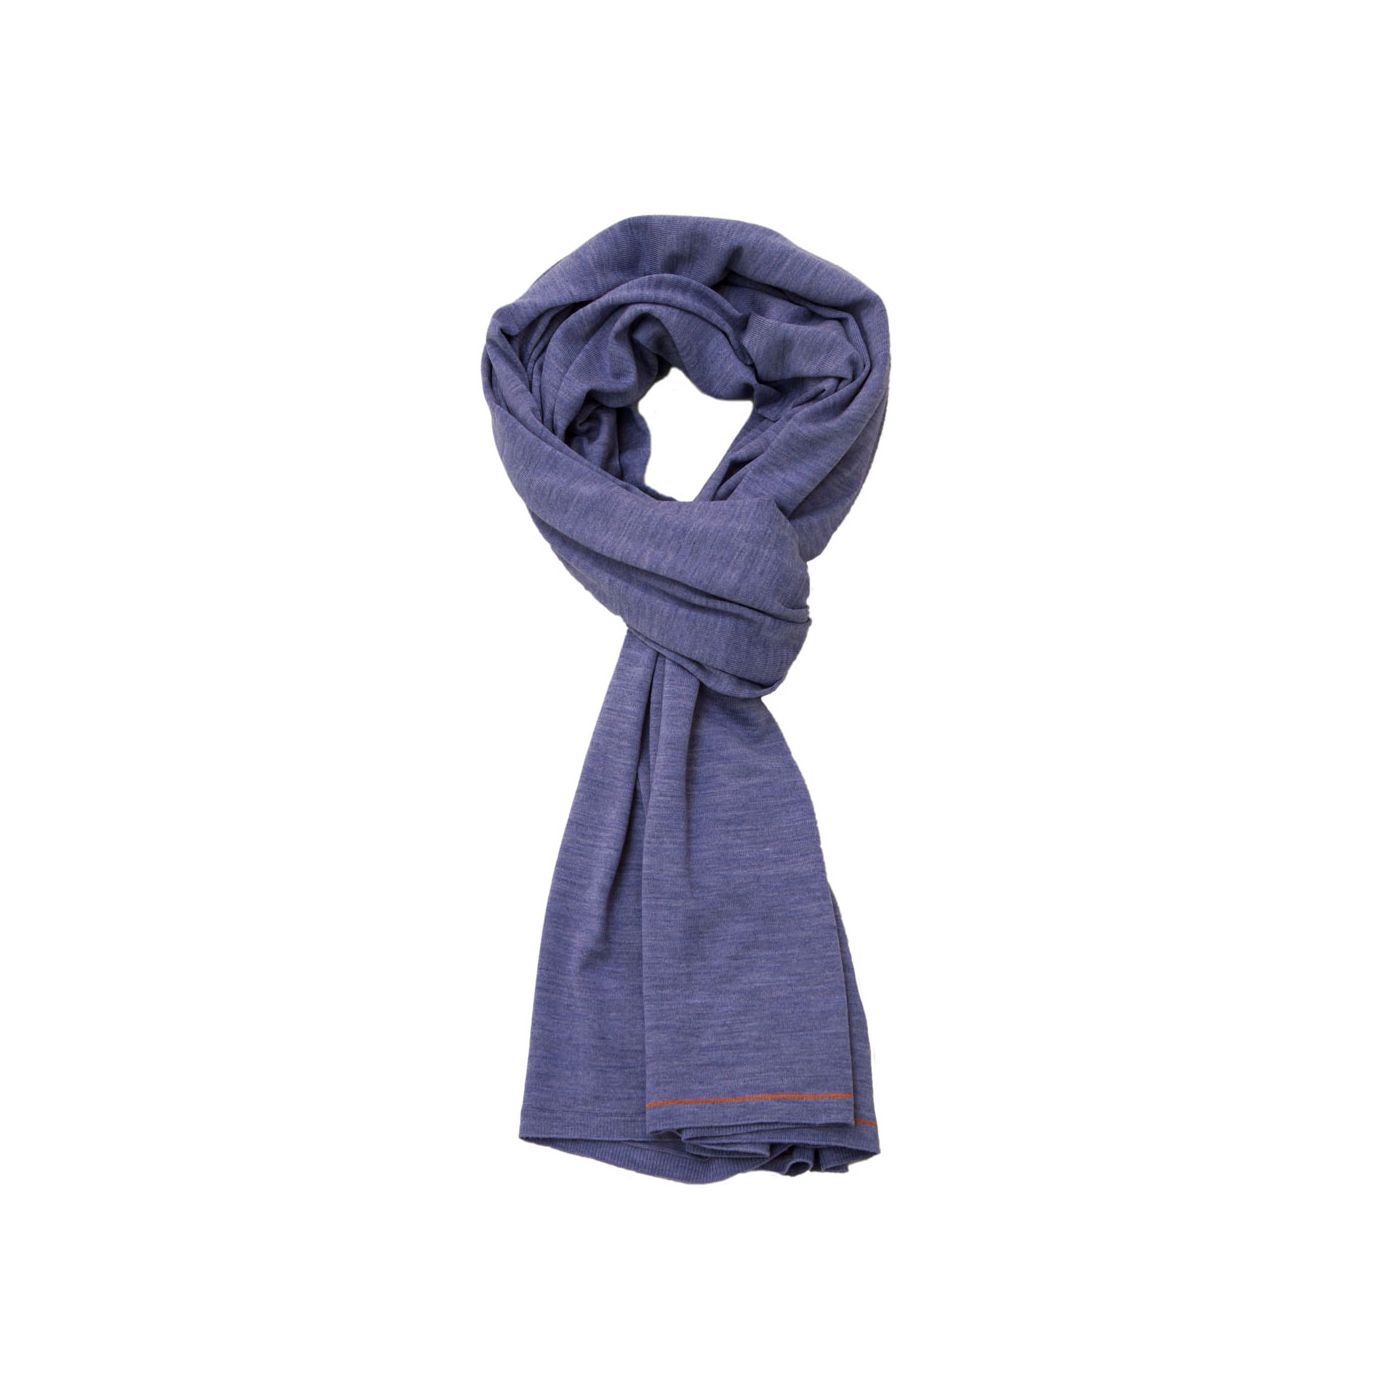 Scarf for men made of Merino wool in Purple